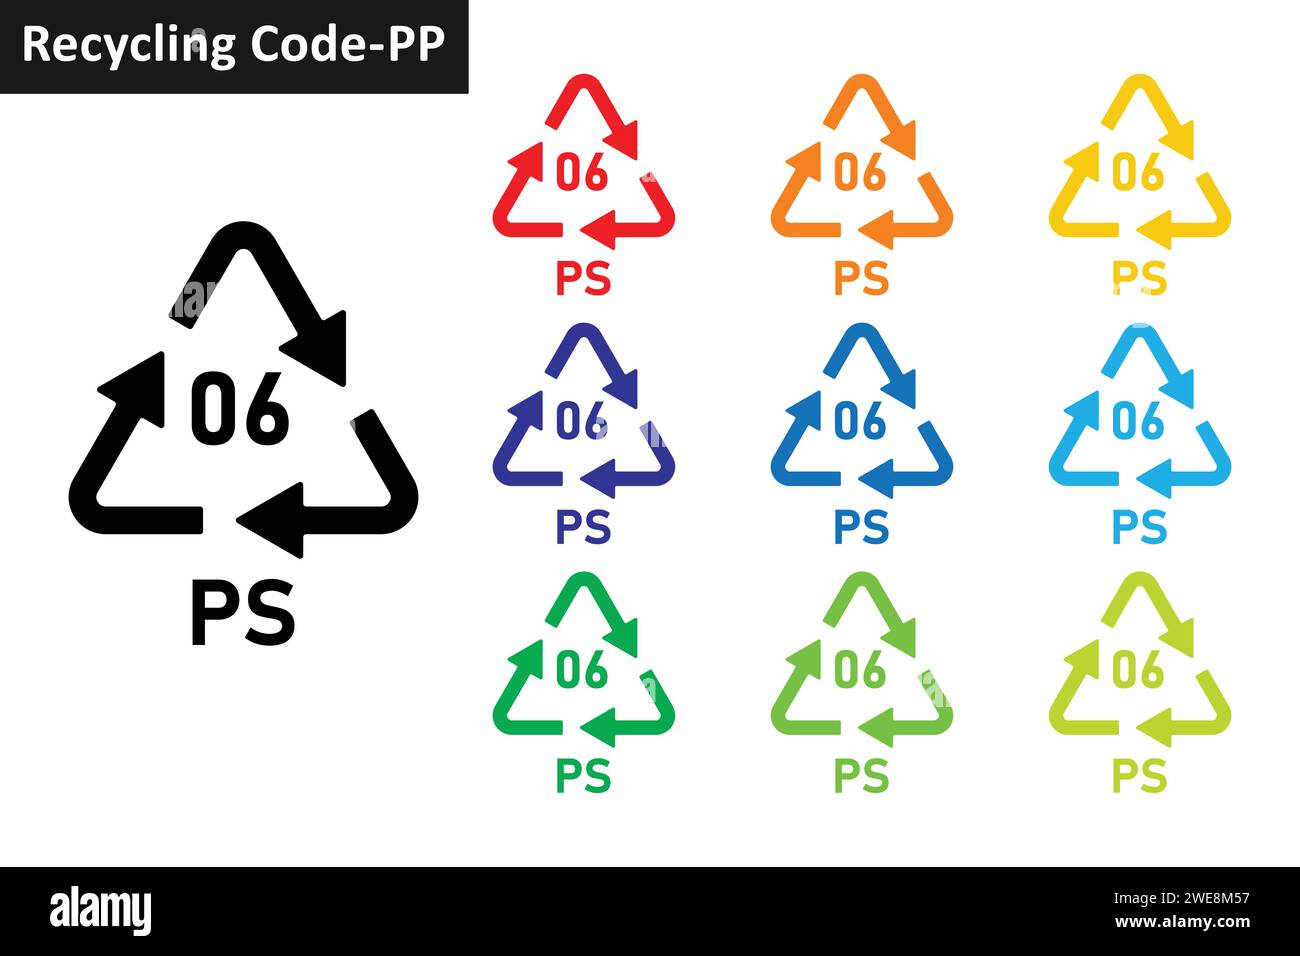 PS plastic recycling code icon set. Plastic recycling symbol 06 PS. Plastic recycling code 06 icon collection in ten different colors. Stock Vector